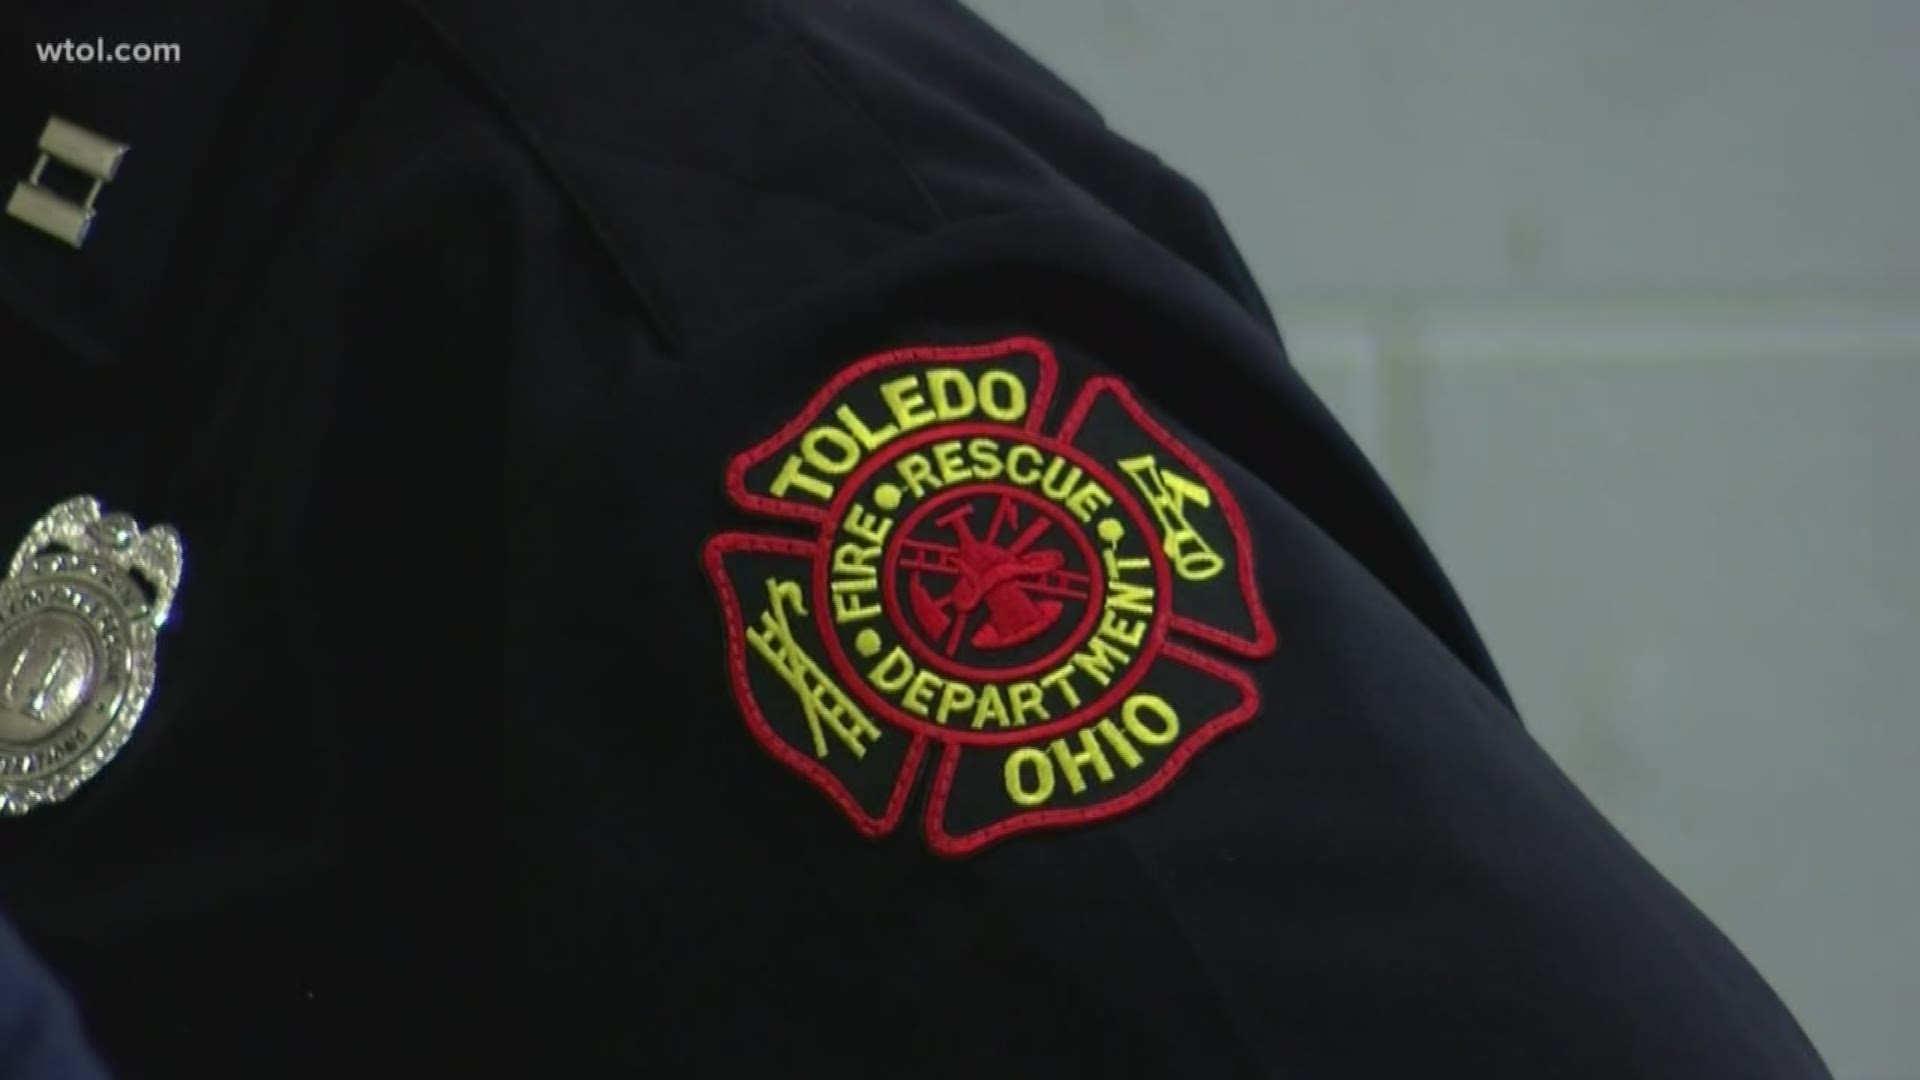 Following last week's mass shooting in Dayton, Toledo's first responders prepare recruits for an active shooter situation.